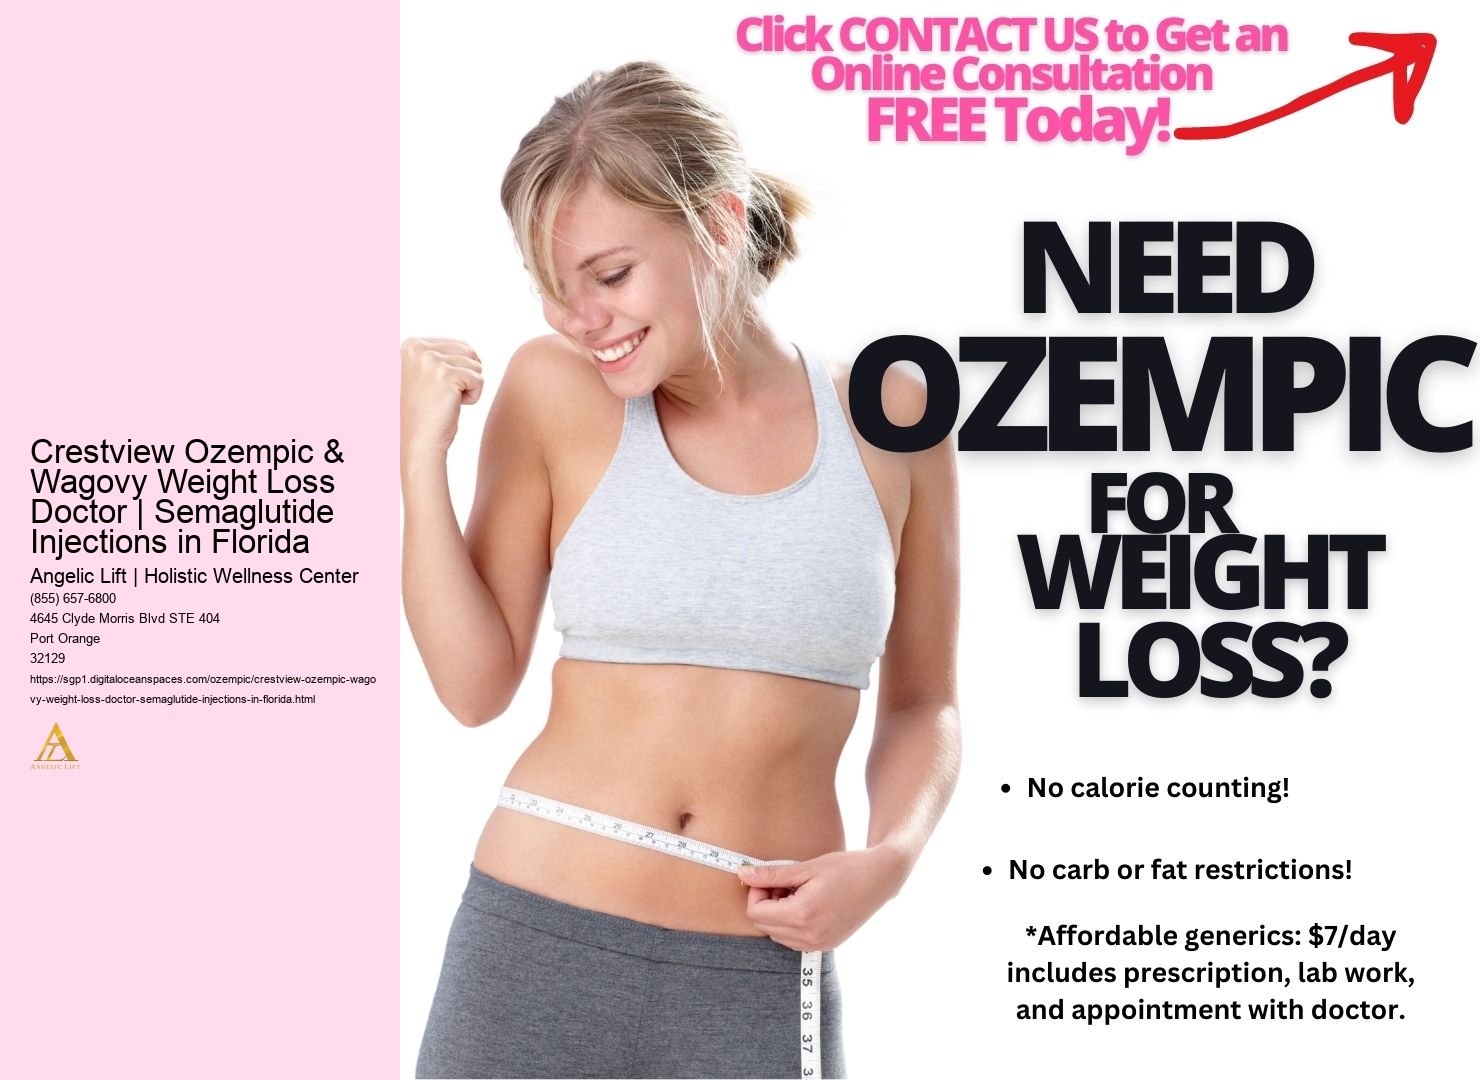 Crestview Ozempic & Wagovy Weight Loss Doctor | Semaglutide Injections in Florida